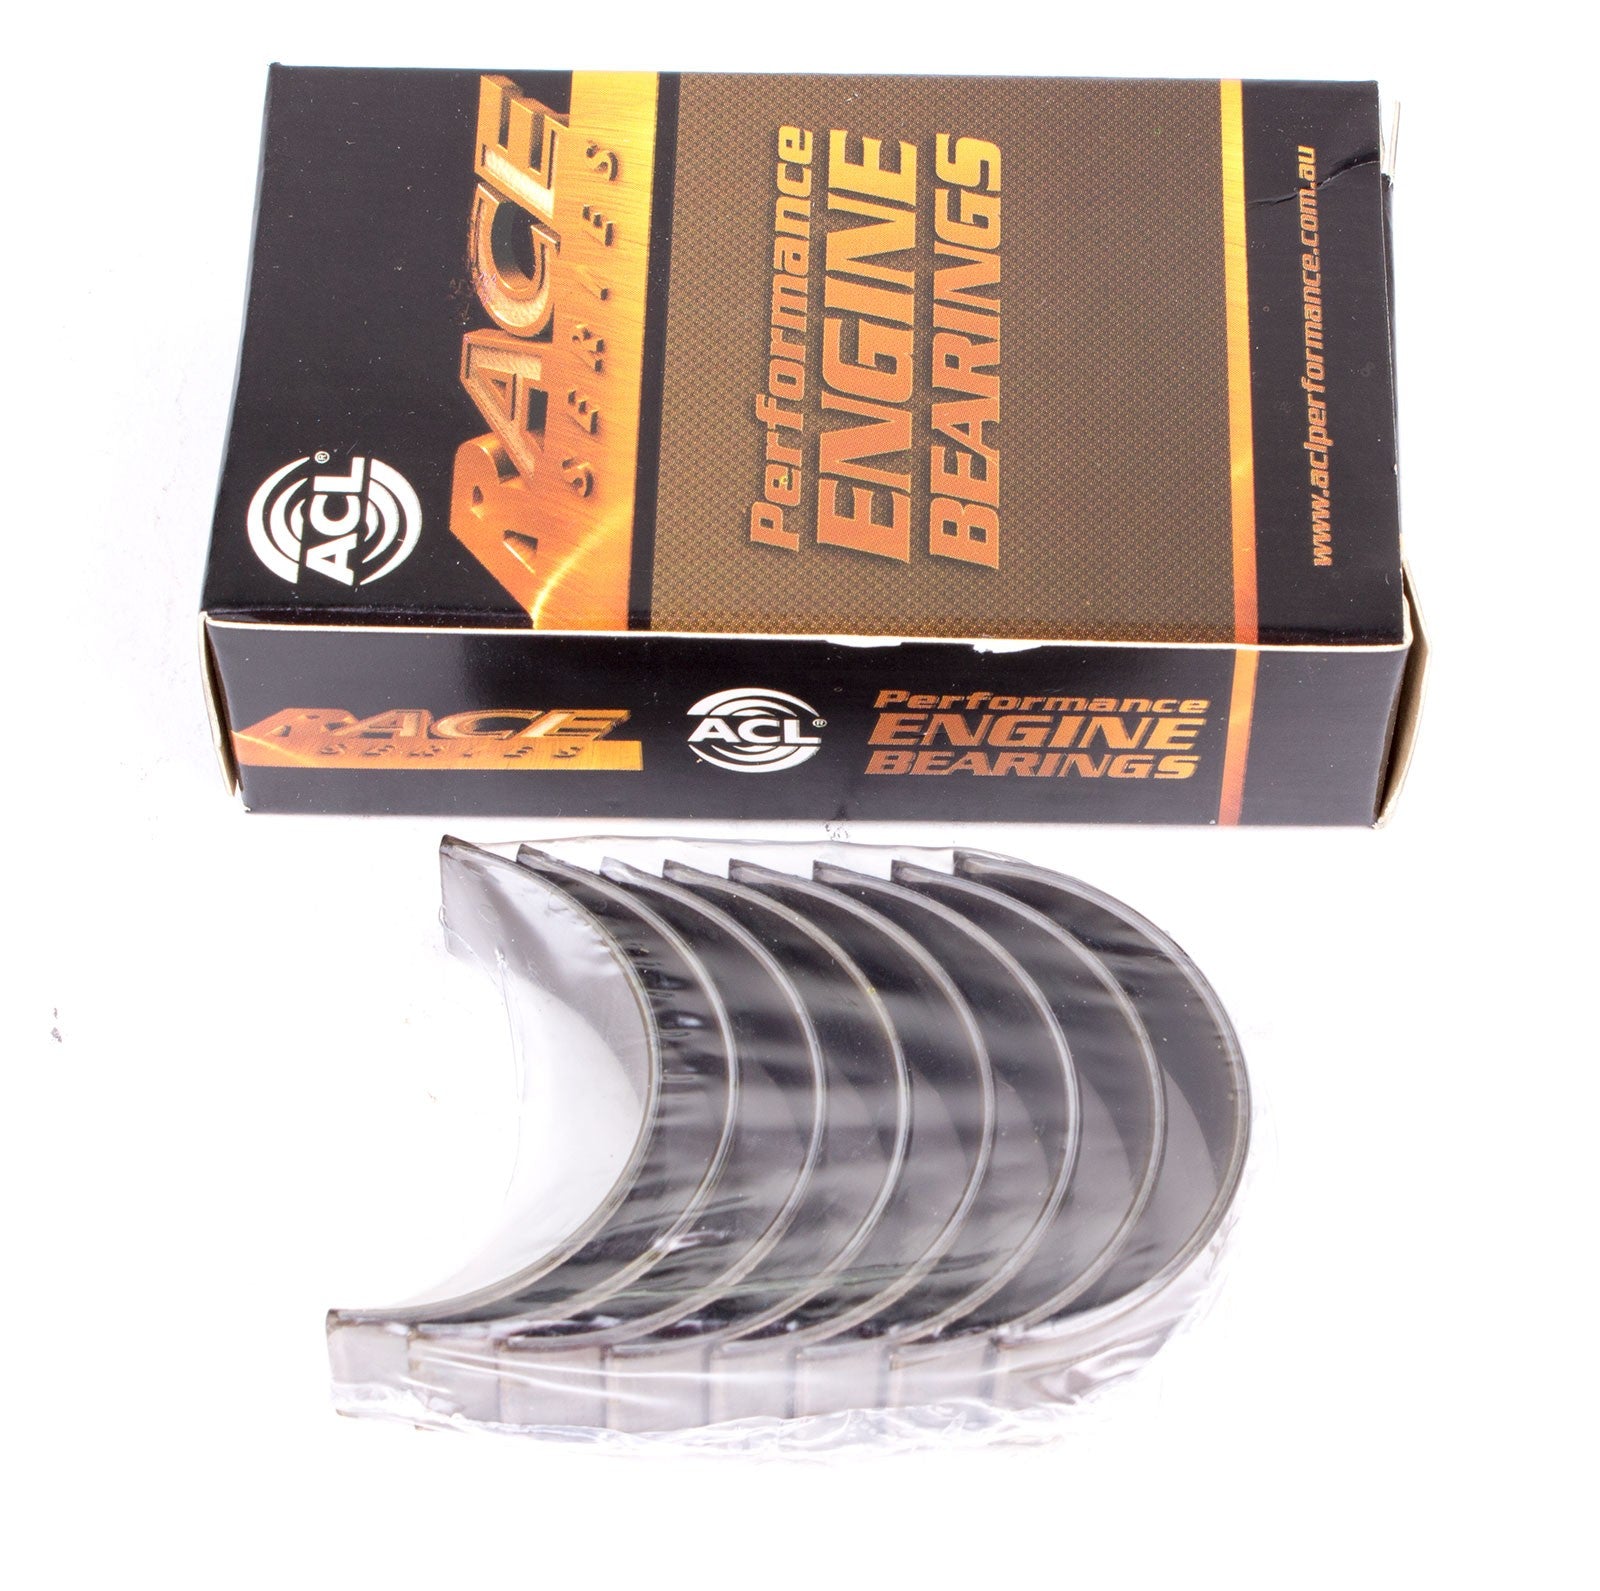 ACL 5M1010H-10 Main bearing set (ACL Race Series) Photo-0 